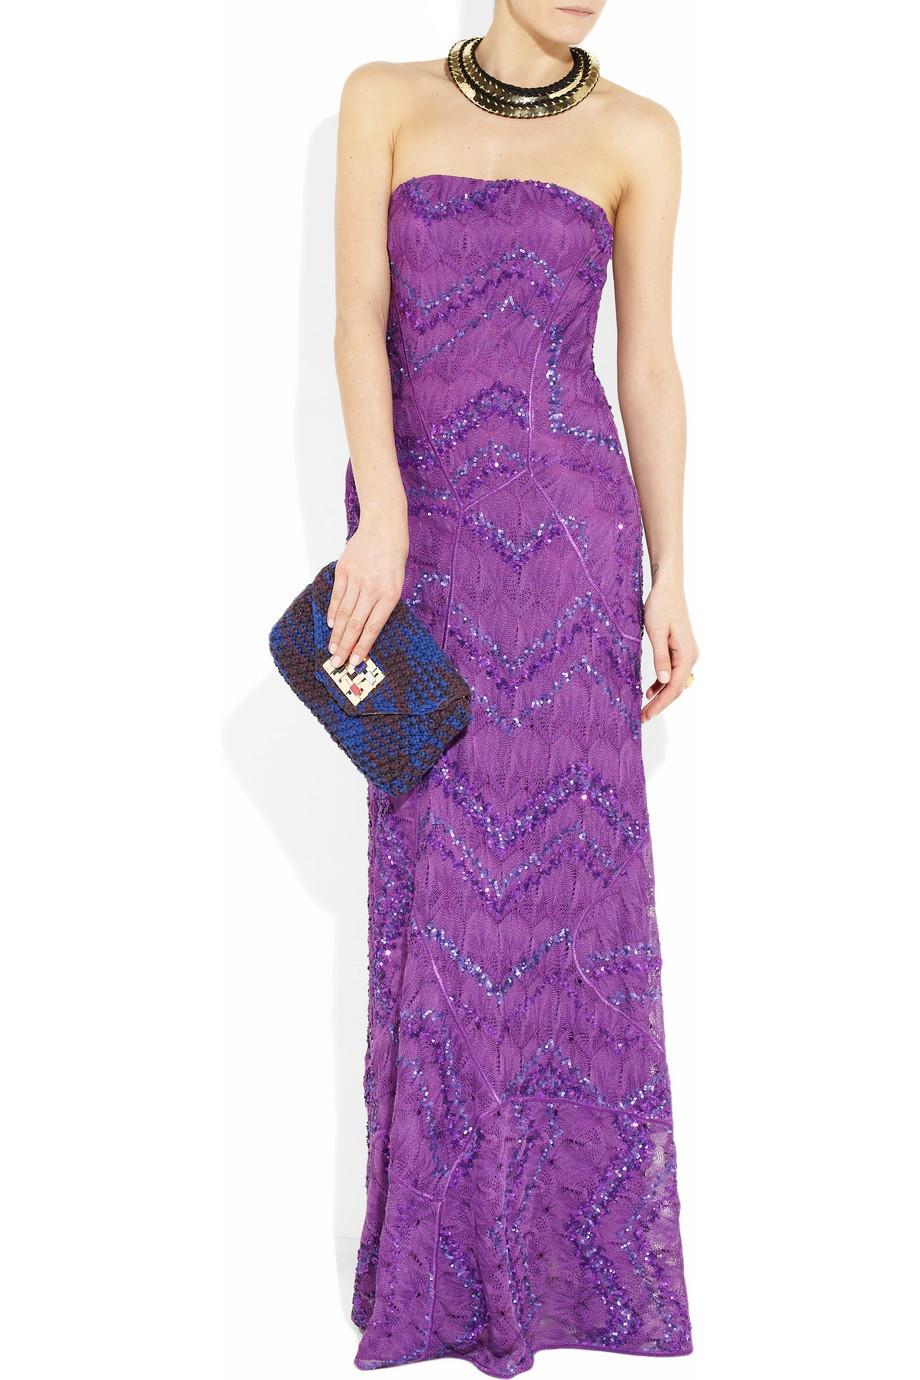 NEW Missoni Purple Embroidered Crochet Knit Evening Gown Maxi Dress 42 For Sale 1